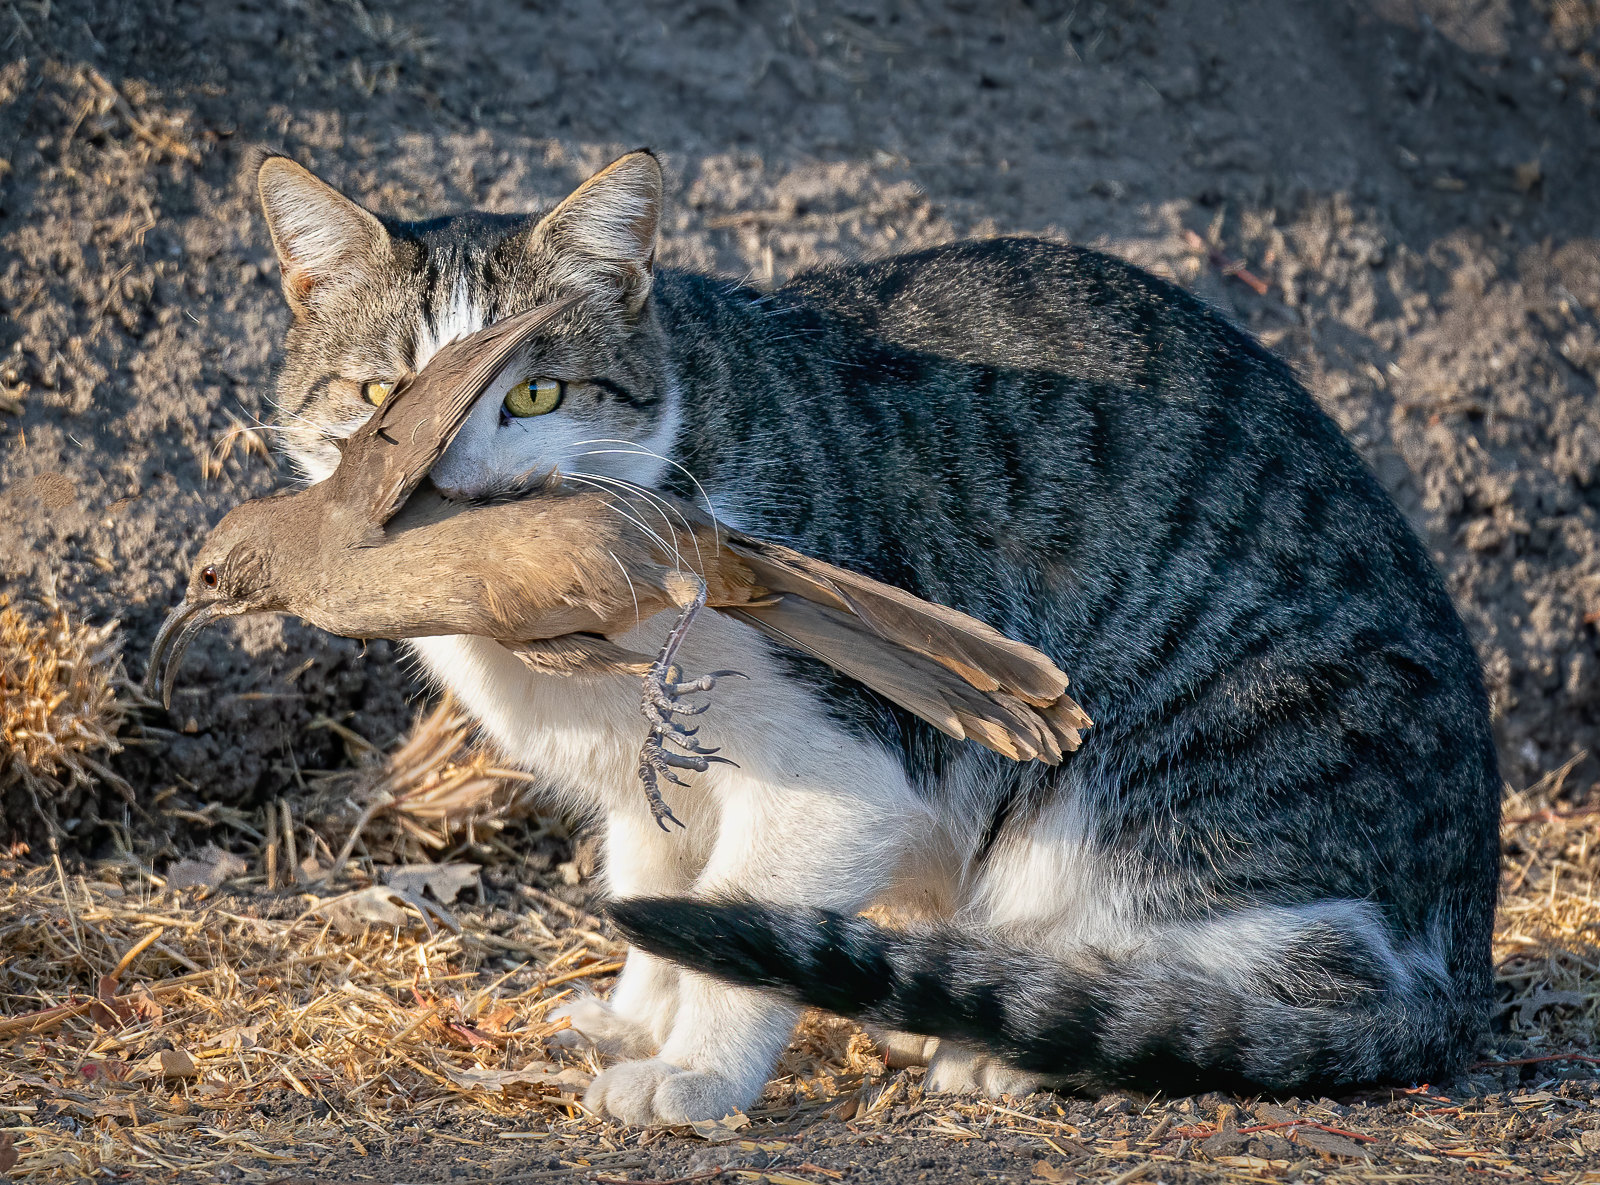 Photo featuring a tabby cat with a dead bird in it's mouth. Background is browed grass and dirt.